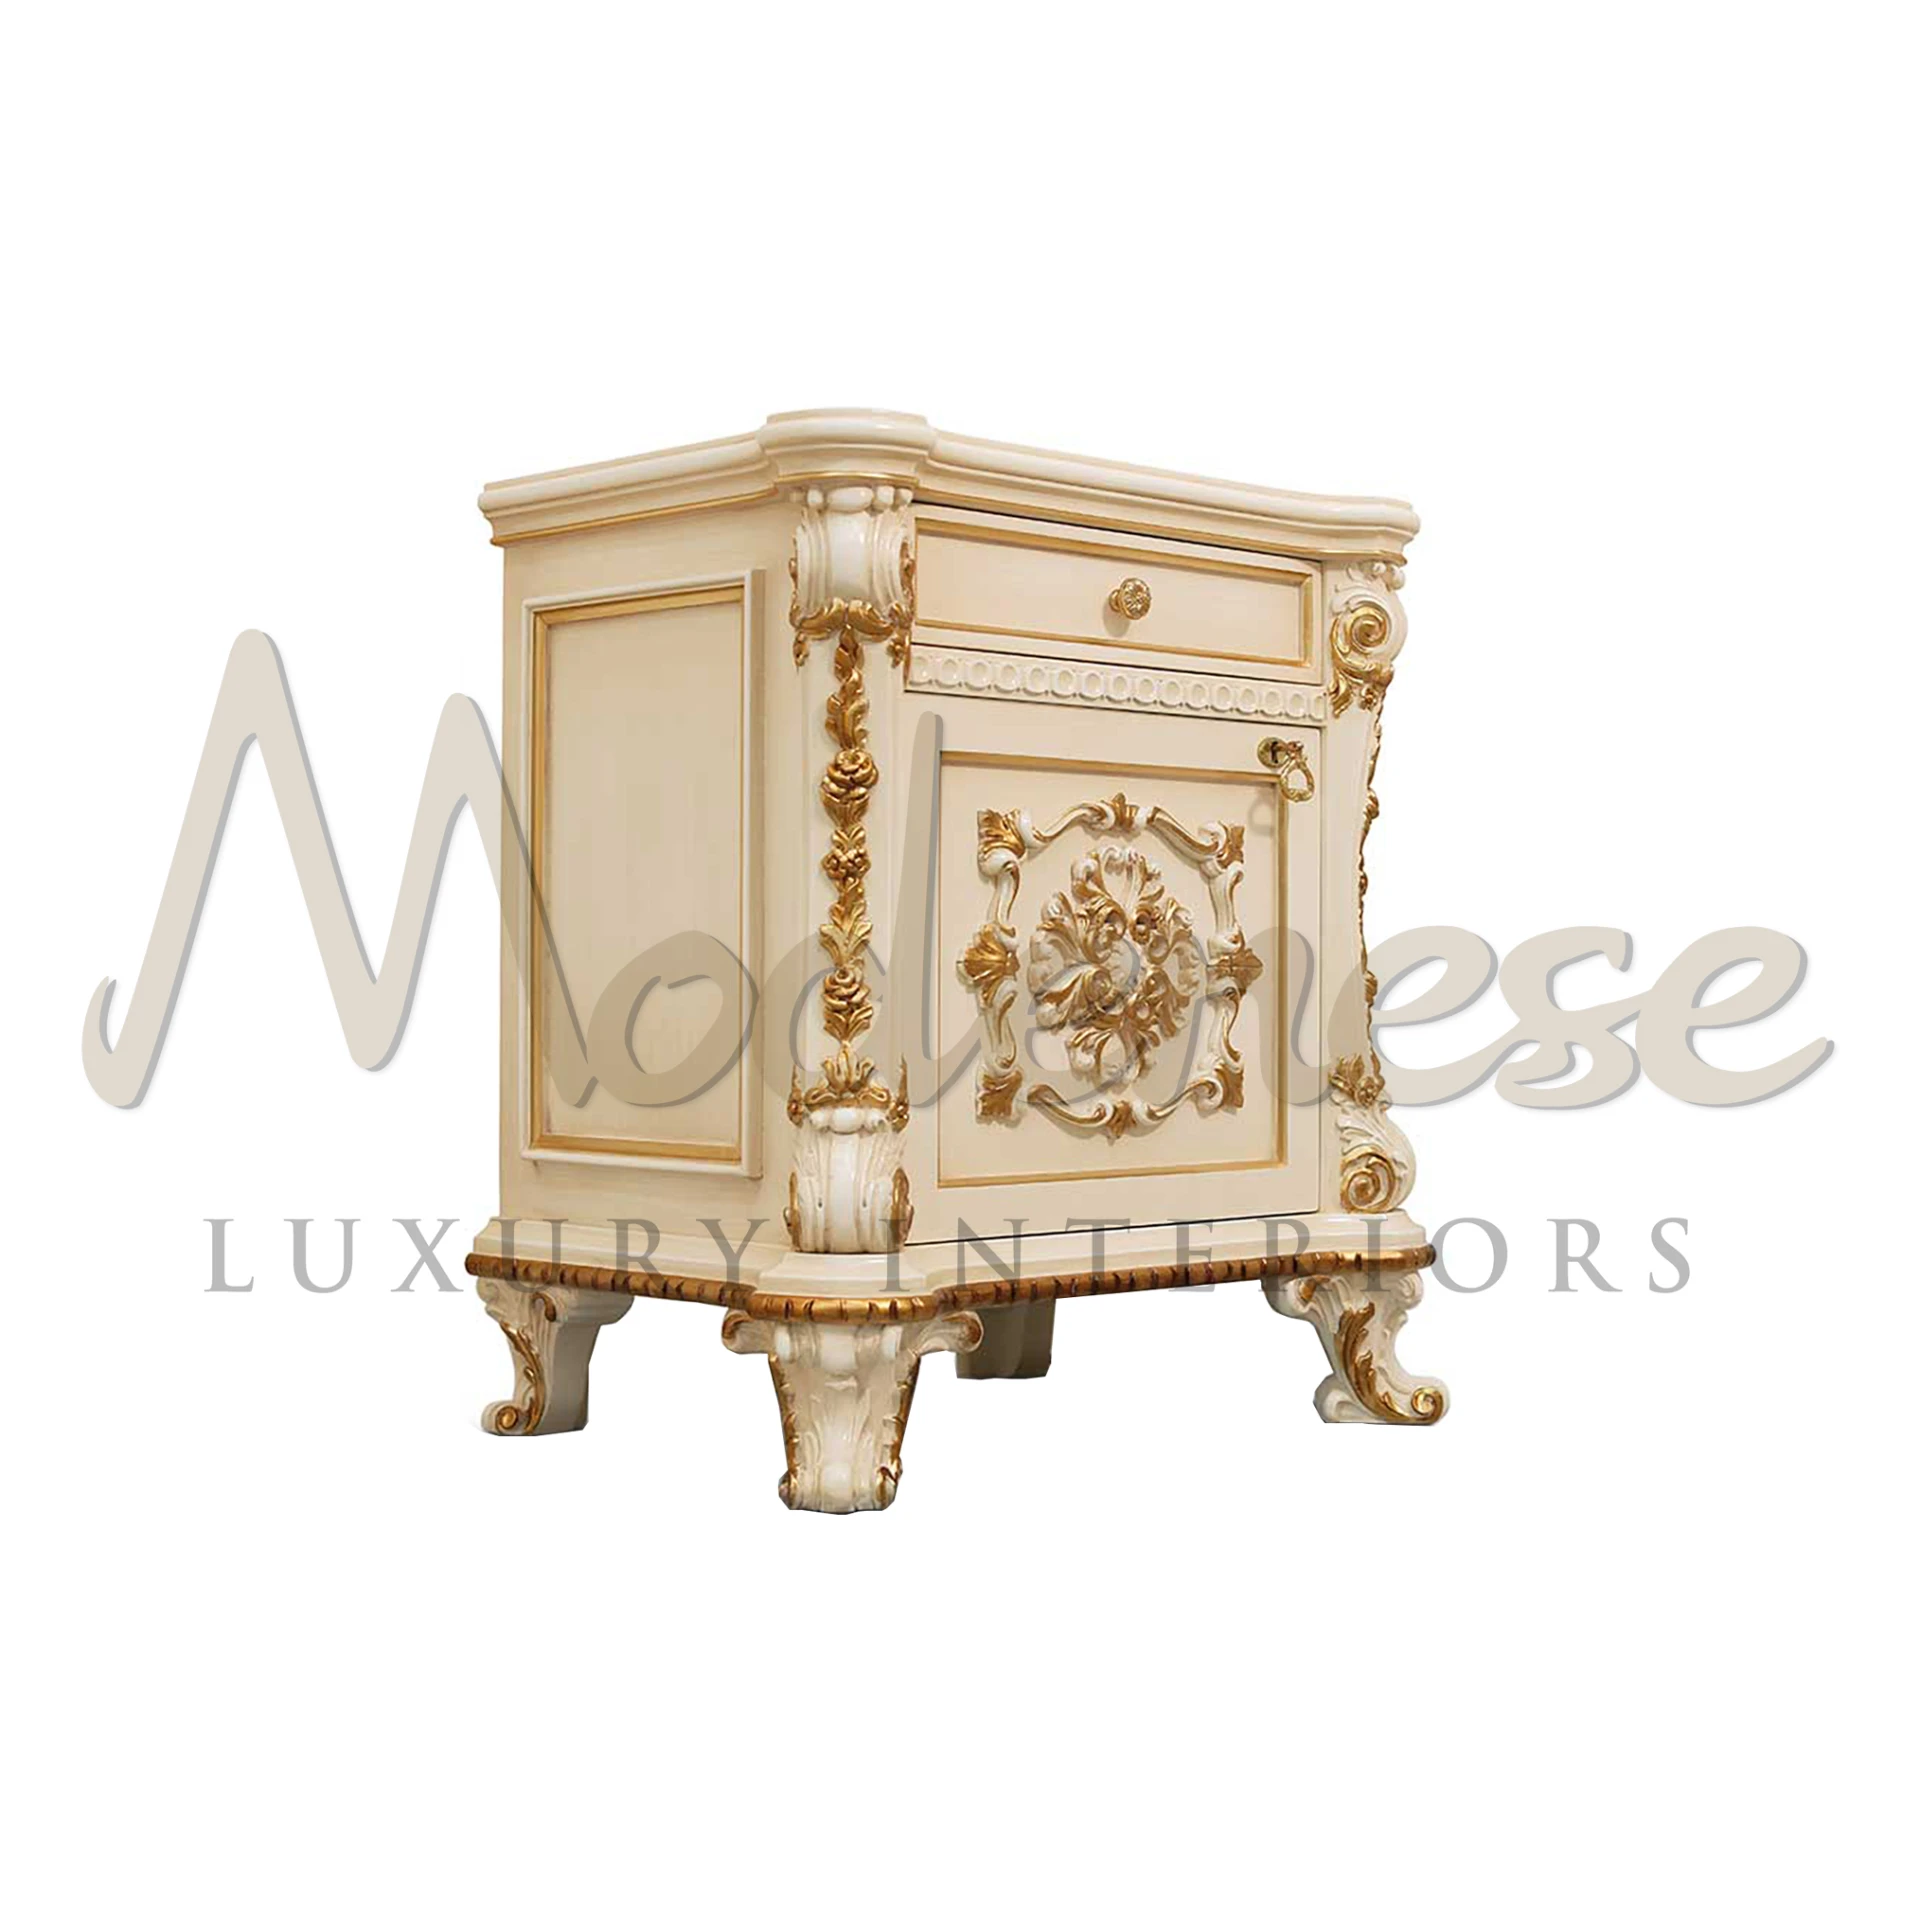 A luxurious cream nightstand with gold ornamental carvings and a detailed floral emblem from Modenese Furniture Manufacturer, showcasing opulent baroque style.